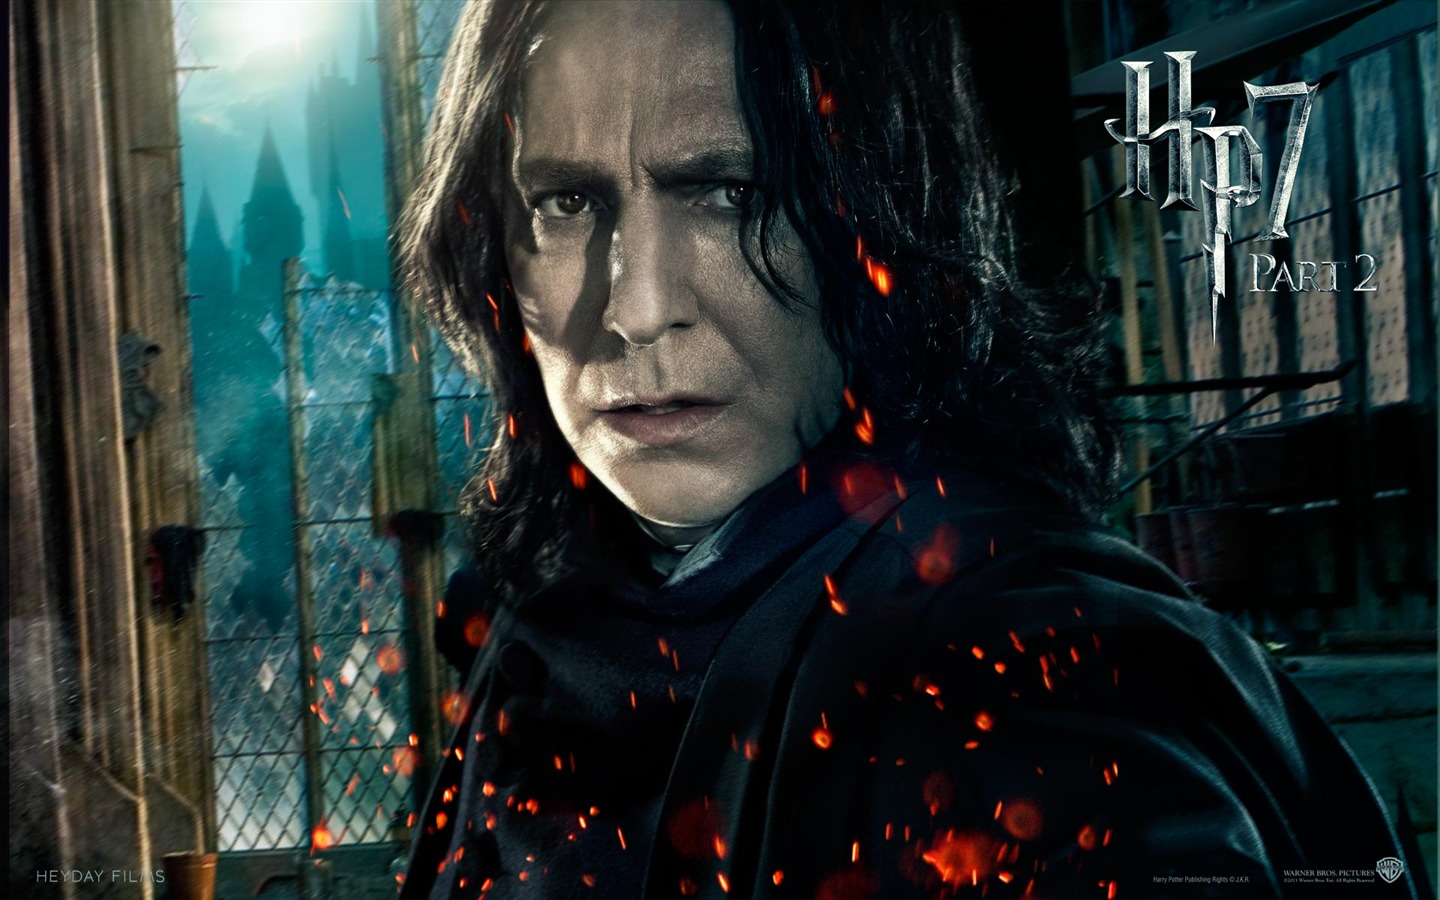 2011 Harry Potter and the Deathly Hallows HD wallpapers #15 - 1440x900